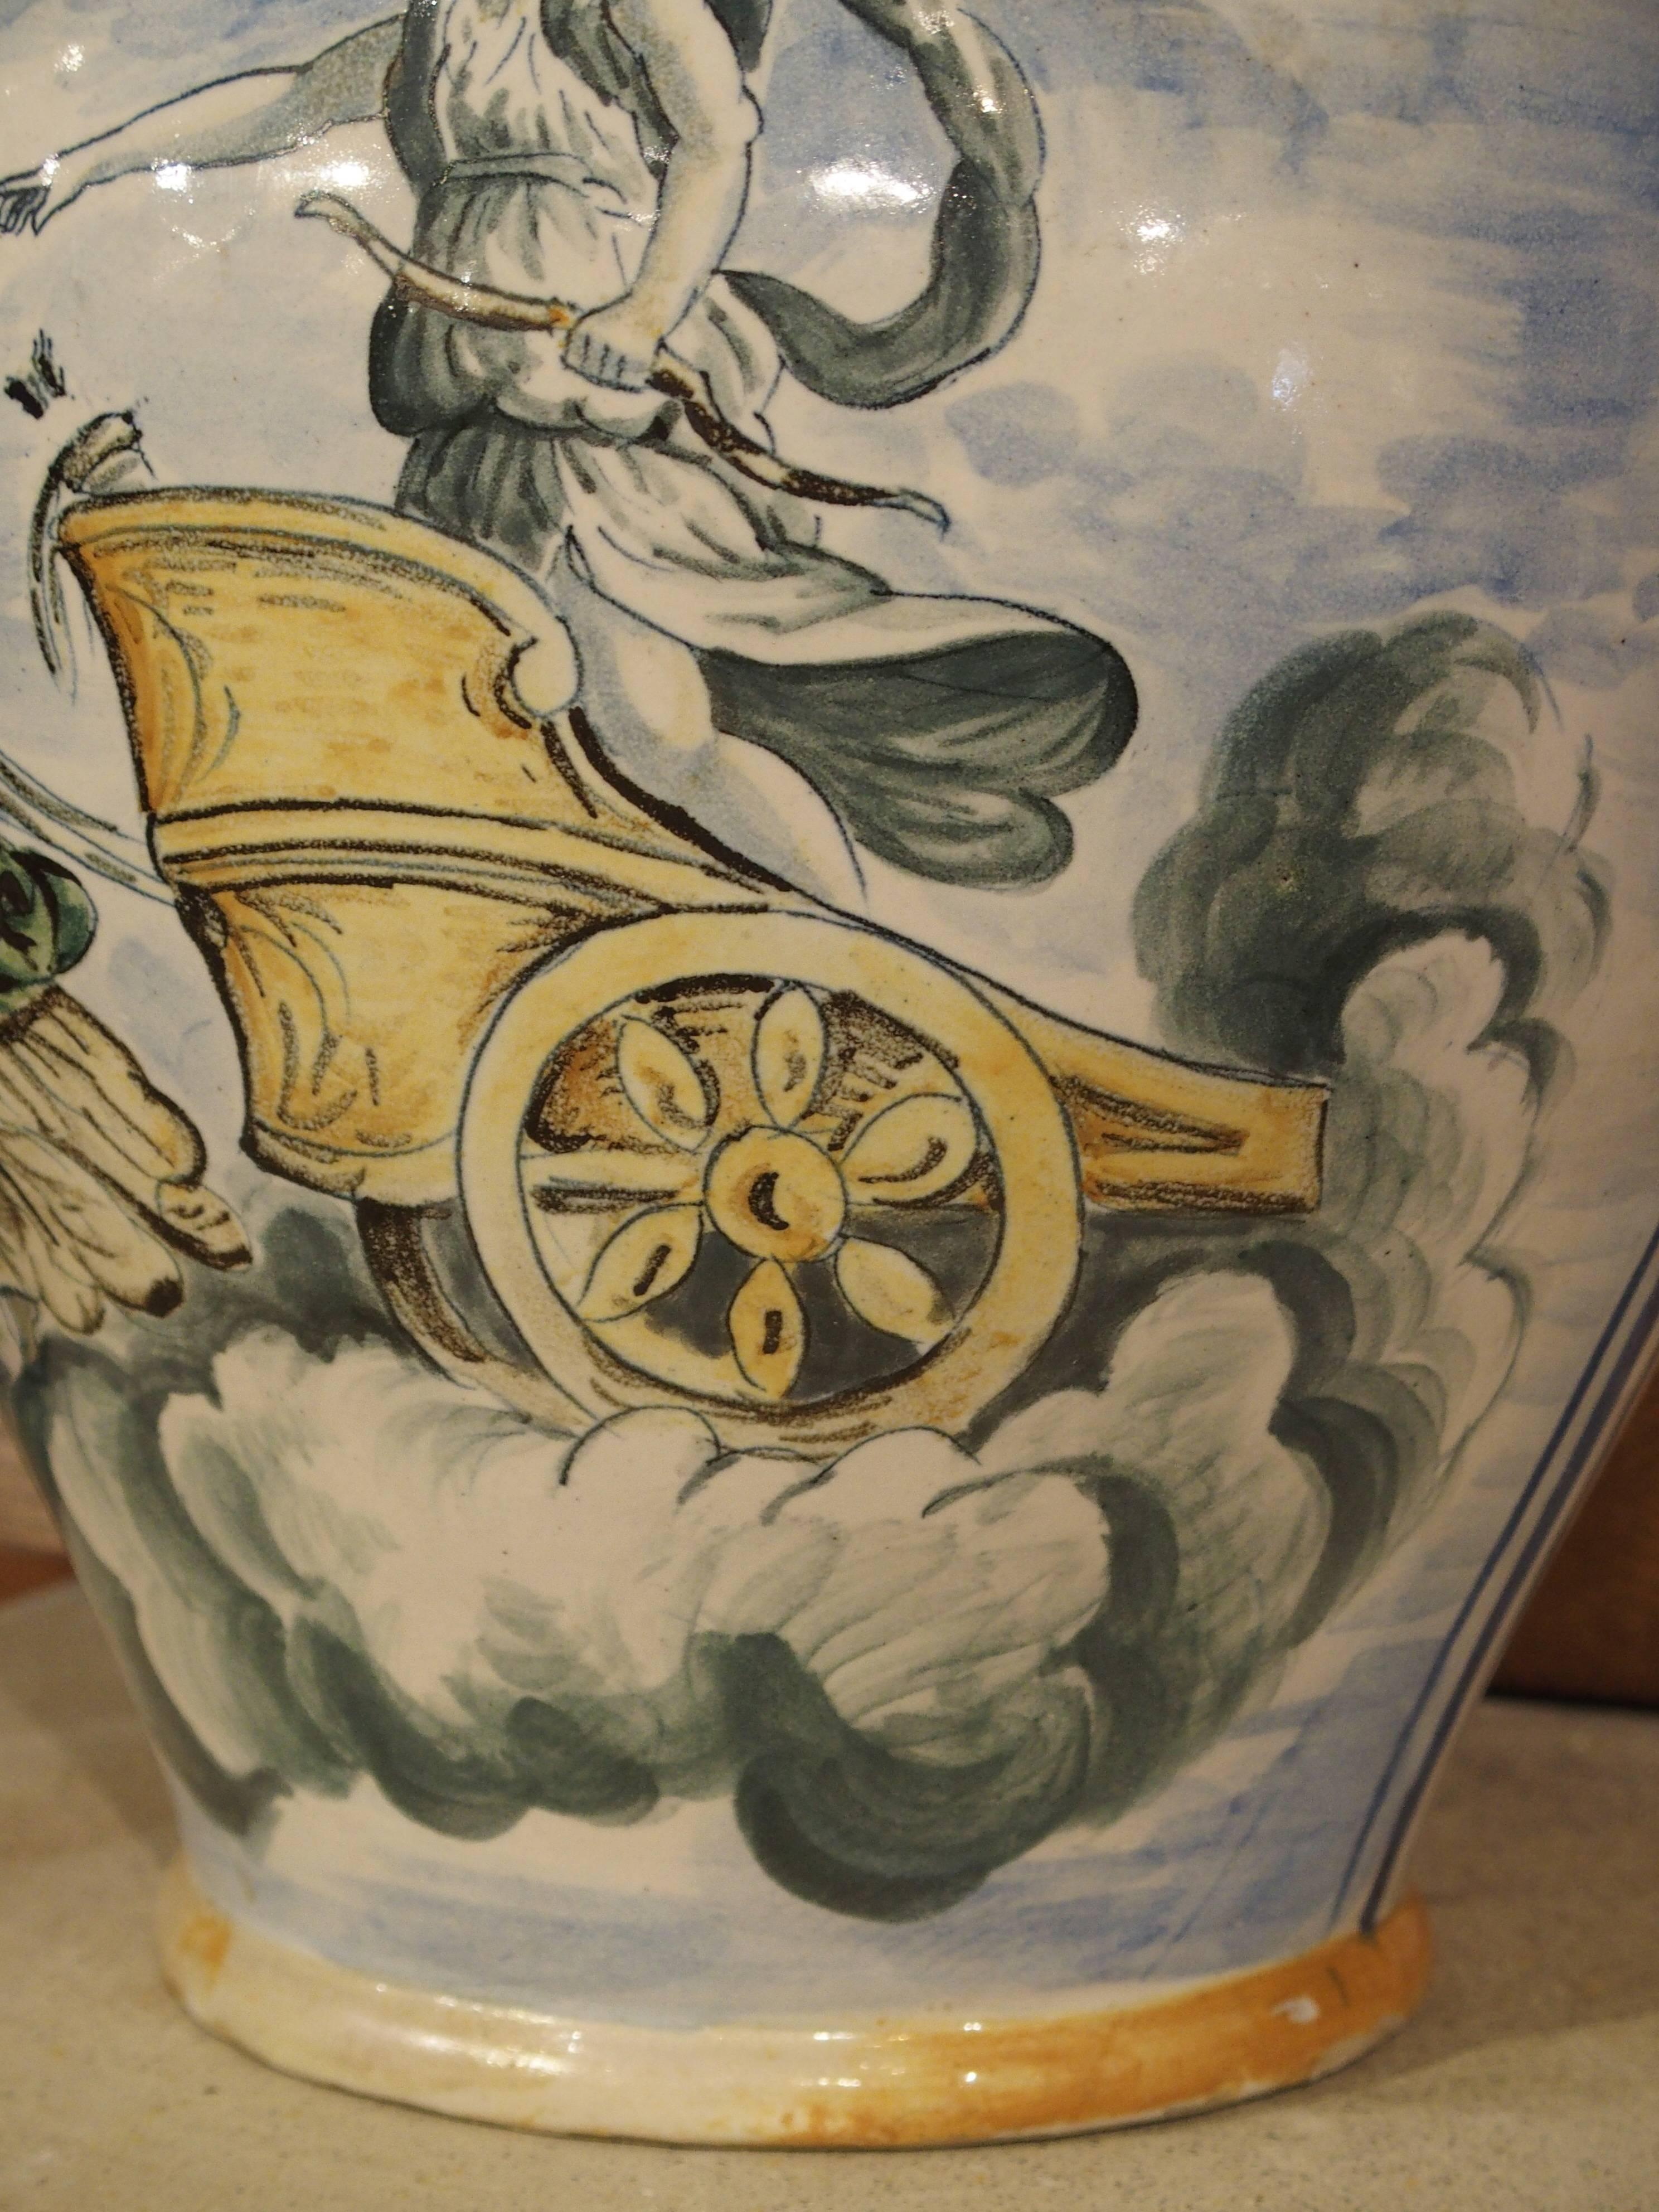 From Italy, this stunning antique Majolica urn depicts a mythological scene on one side and a large workshop marking and date on the other. The mythological scene depicts a young man in a chariot that is being pulled by two maidens in stylized